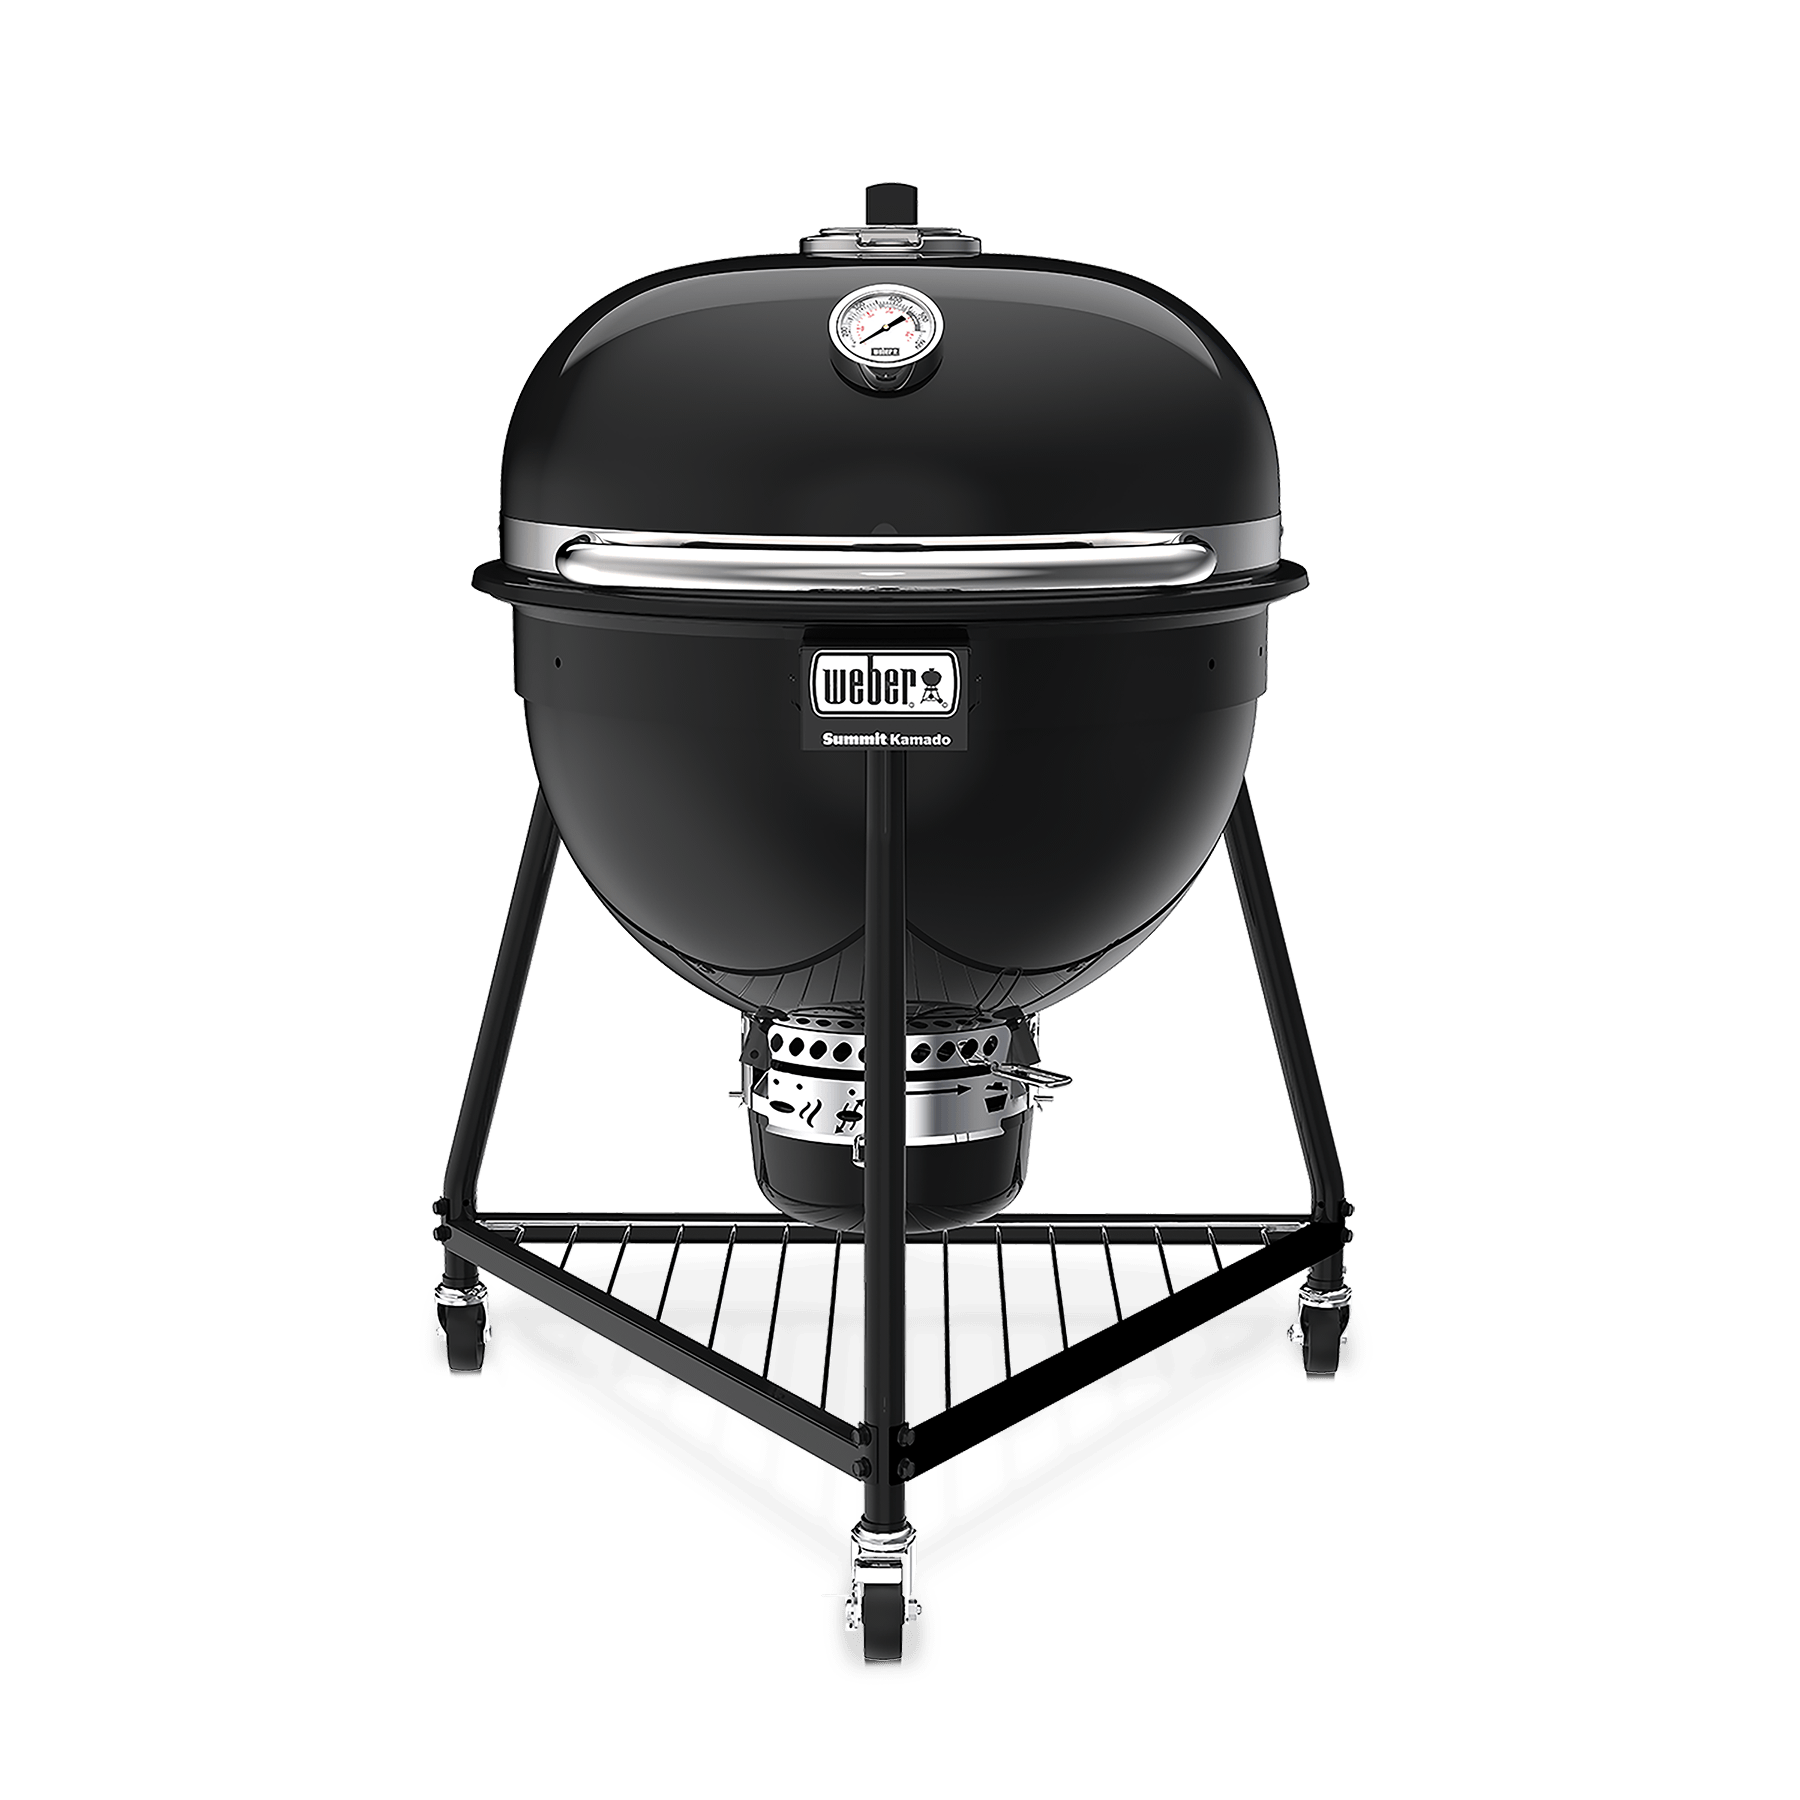 https://www.weber.com/NL/nl/barbecues/gasbarbecues/genesis-ii-serie/117642_2022-EX-315-Accessories.html daily 0.5 https://product-images.weber.com/sets-images/Genesis-EX-315-Accessories-Bundle-4-Bild-1.png?auto ...